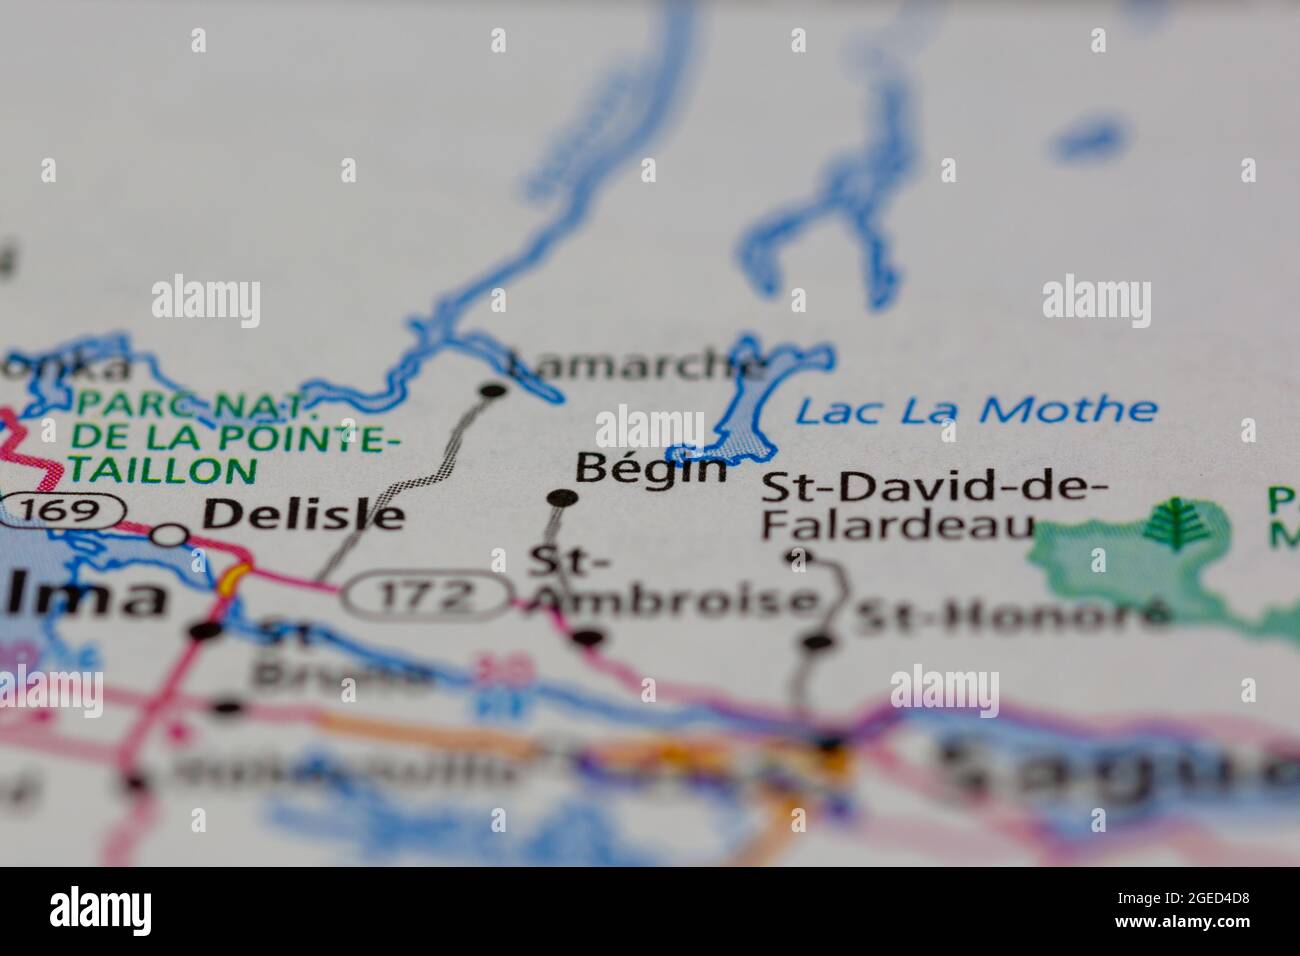 Begin Quebec Canada shown on a road map or Geography map Stock Photo